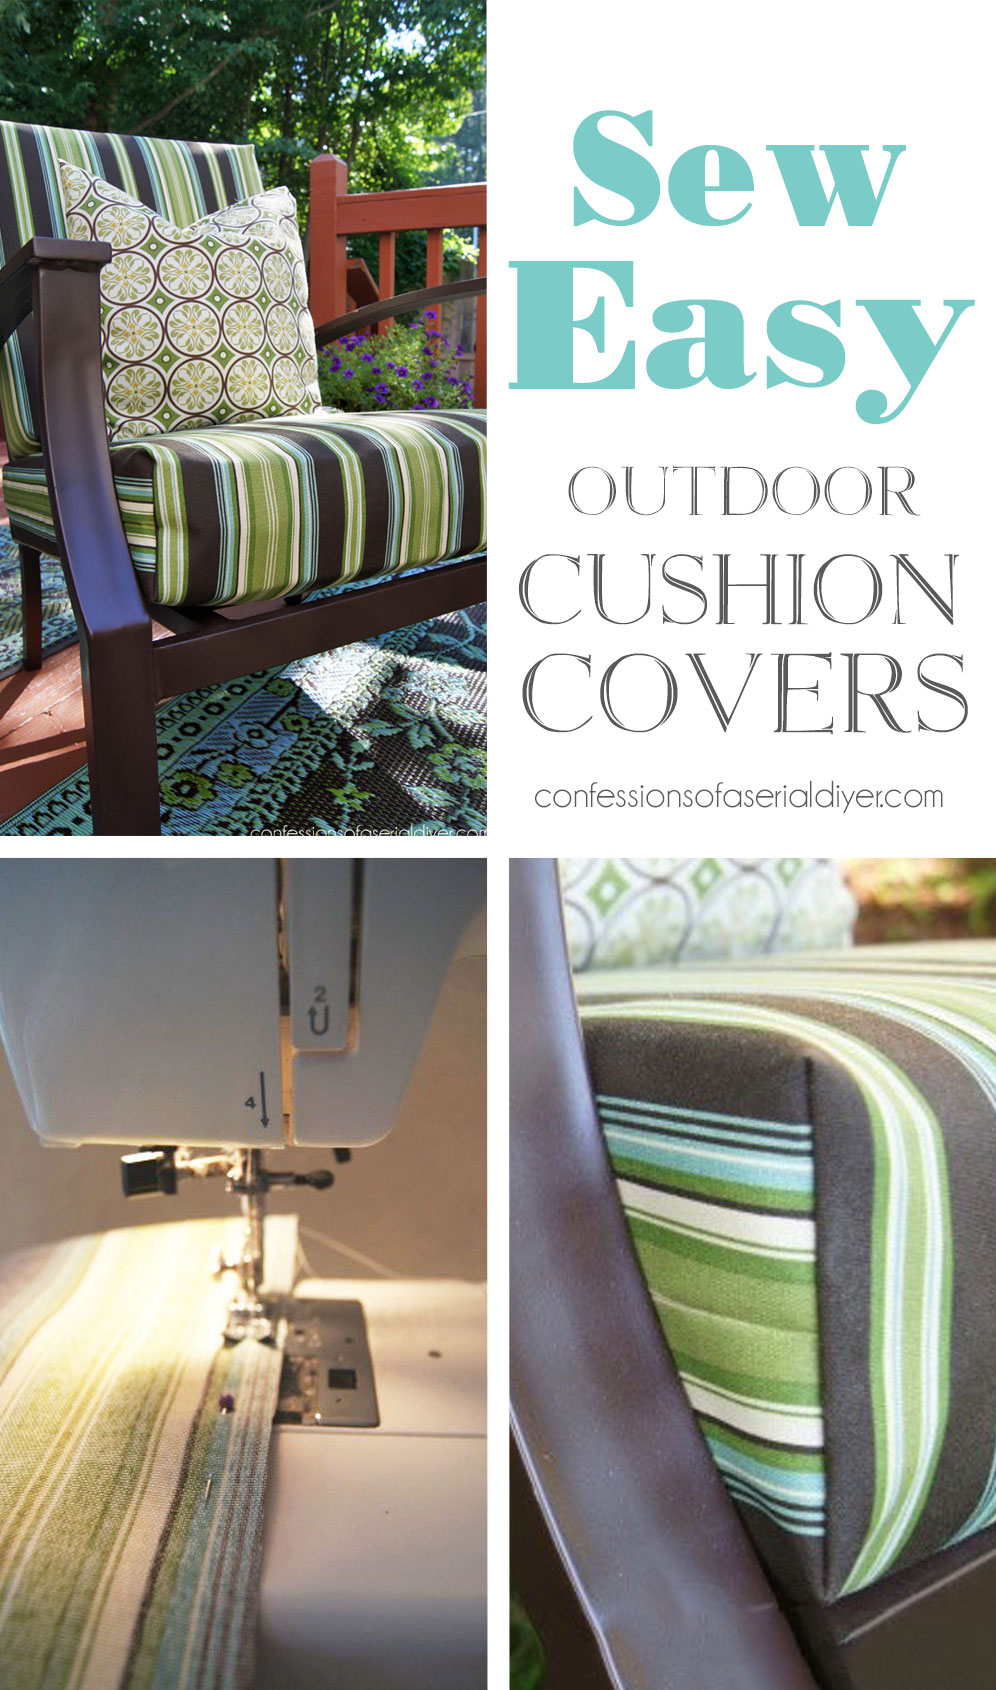 Sew Easy Outdoor Cushion Covers, How To Make Cushion Covers For Outdoor Chairs